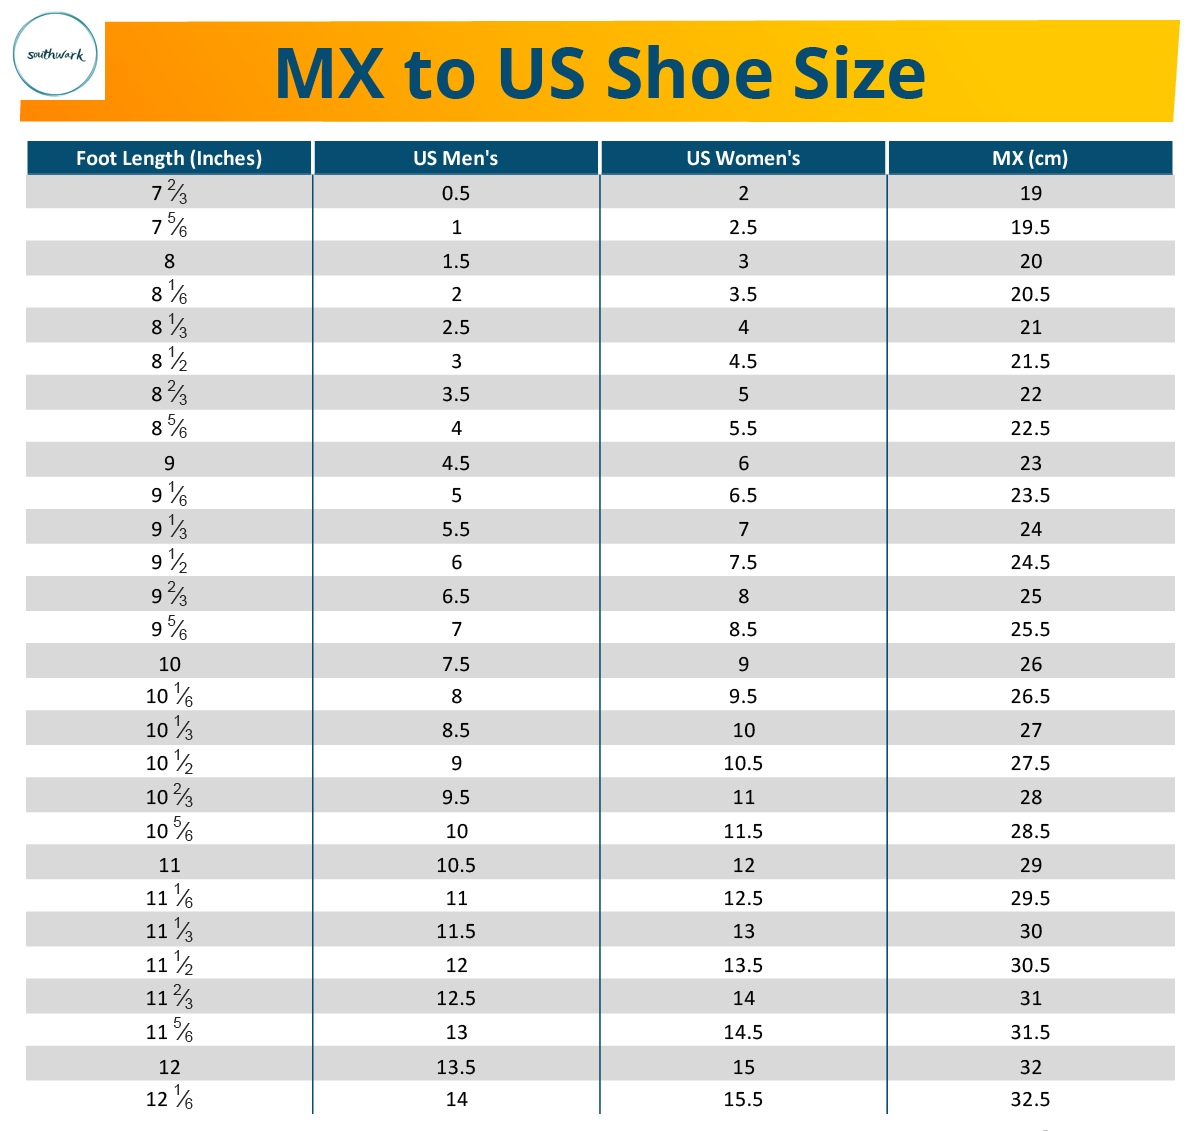 Mexico shoe size chart. How to convert Mexico shoe size to US? -  